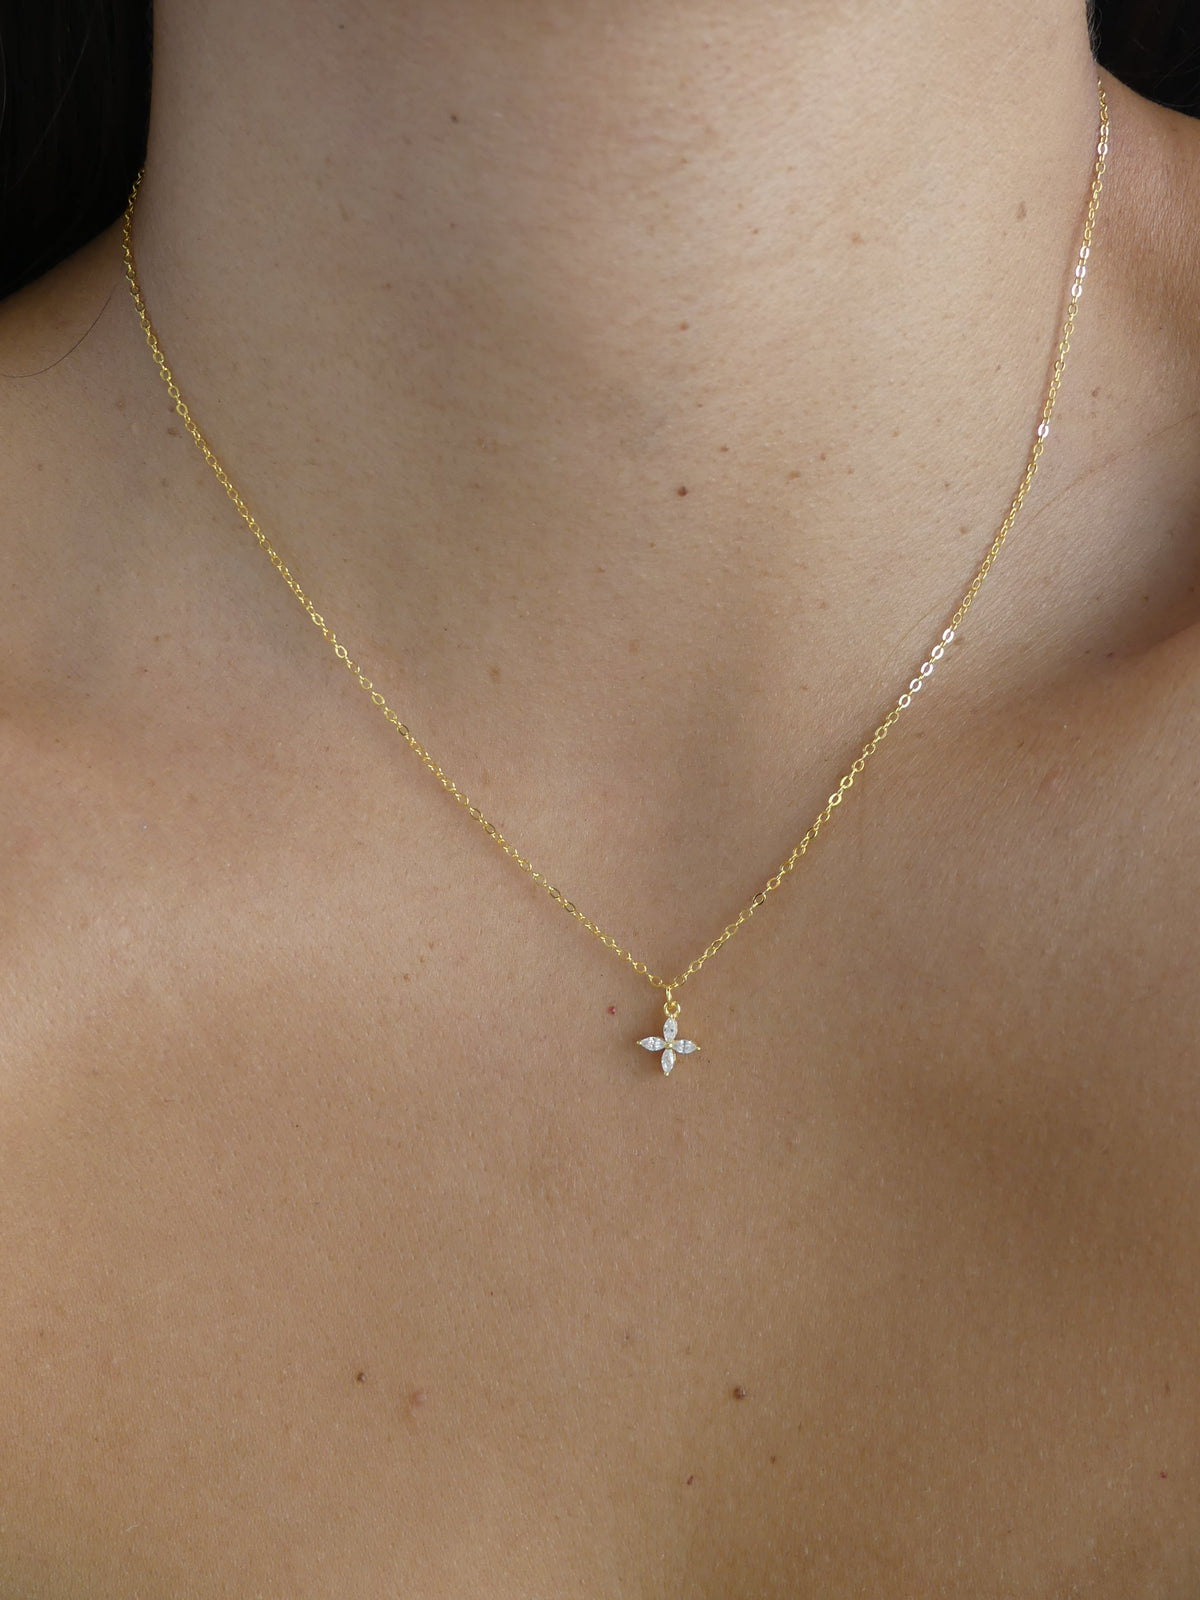 dainty necklaces in gold sterling silver for sensitive skin wont turn green water proof .925 sterling silver diamond zircon flower dainty necklace dainty necklaces for layering Miami things to do in miami art basel Kesley Boutique